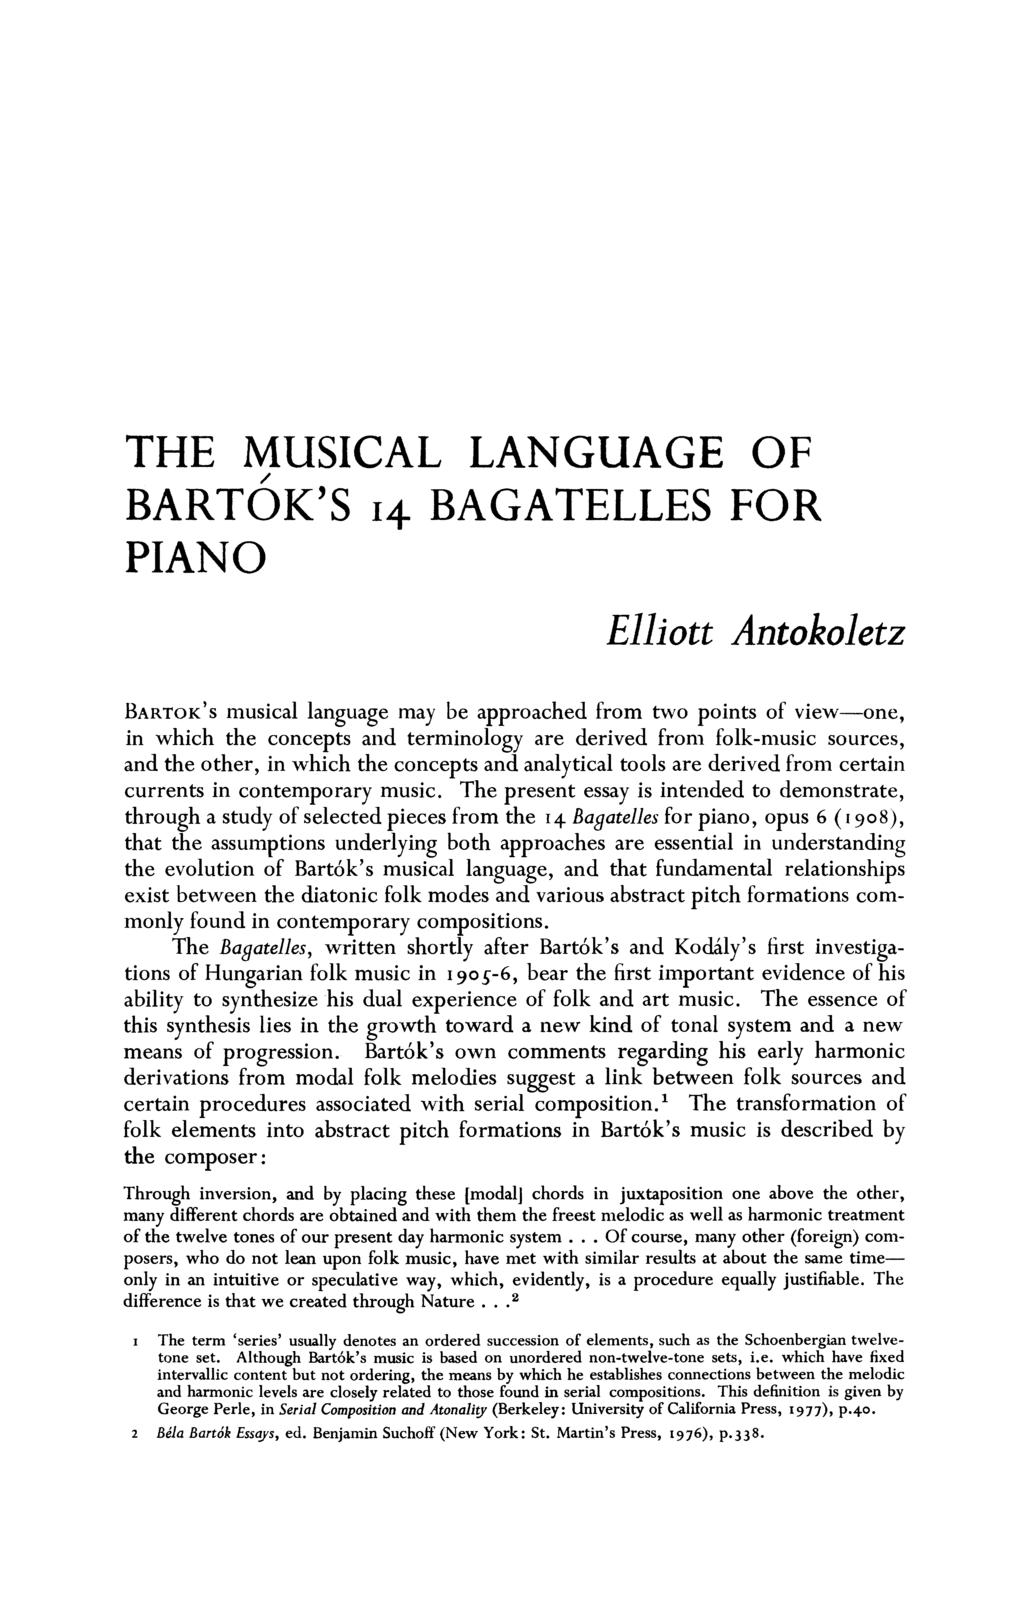 THE MUSICAL LANGUAGE OF BARTOK'S i4 BAGATELLES FOR PIANO Elliott Antokoletz BARTOK'S musical language may be approached from two points of view-one, in which the concepts and terminology are derived